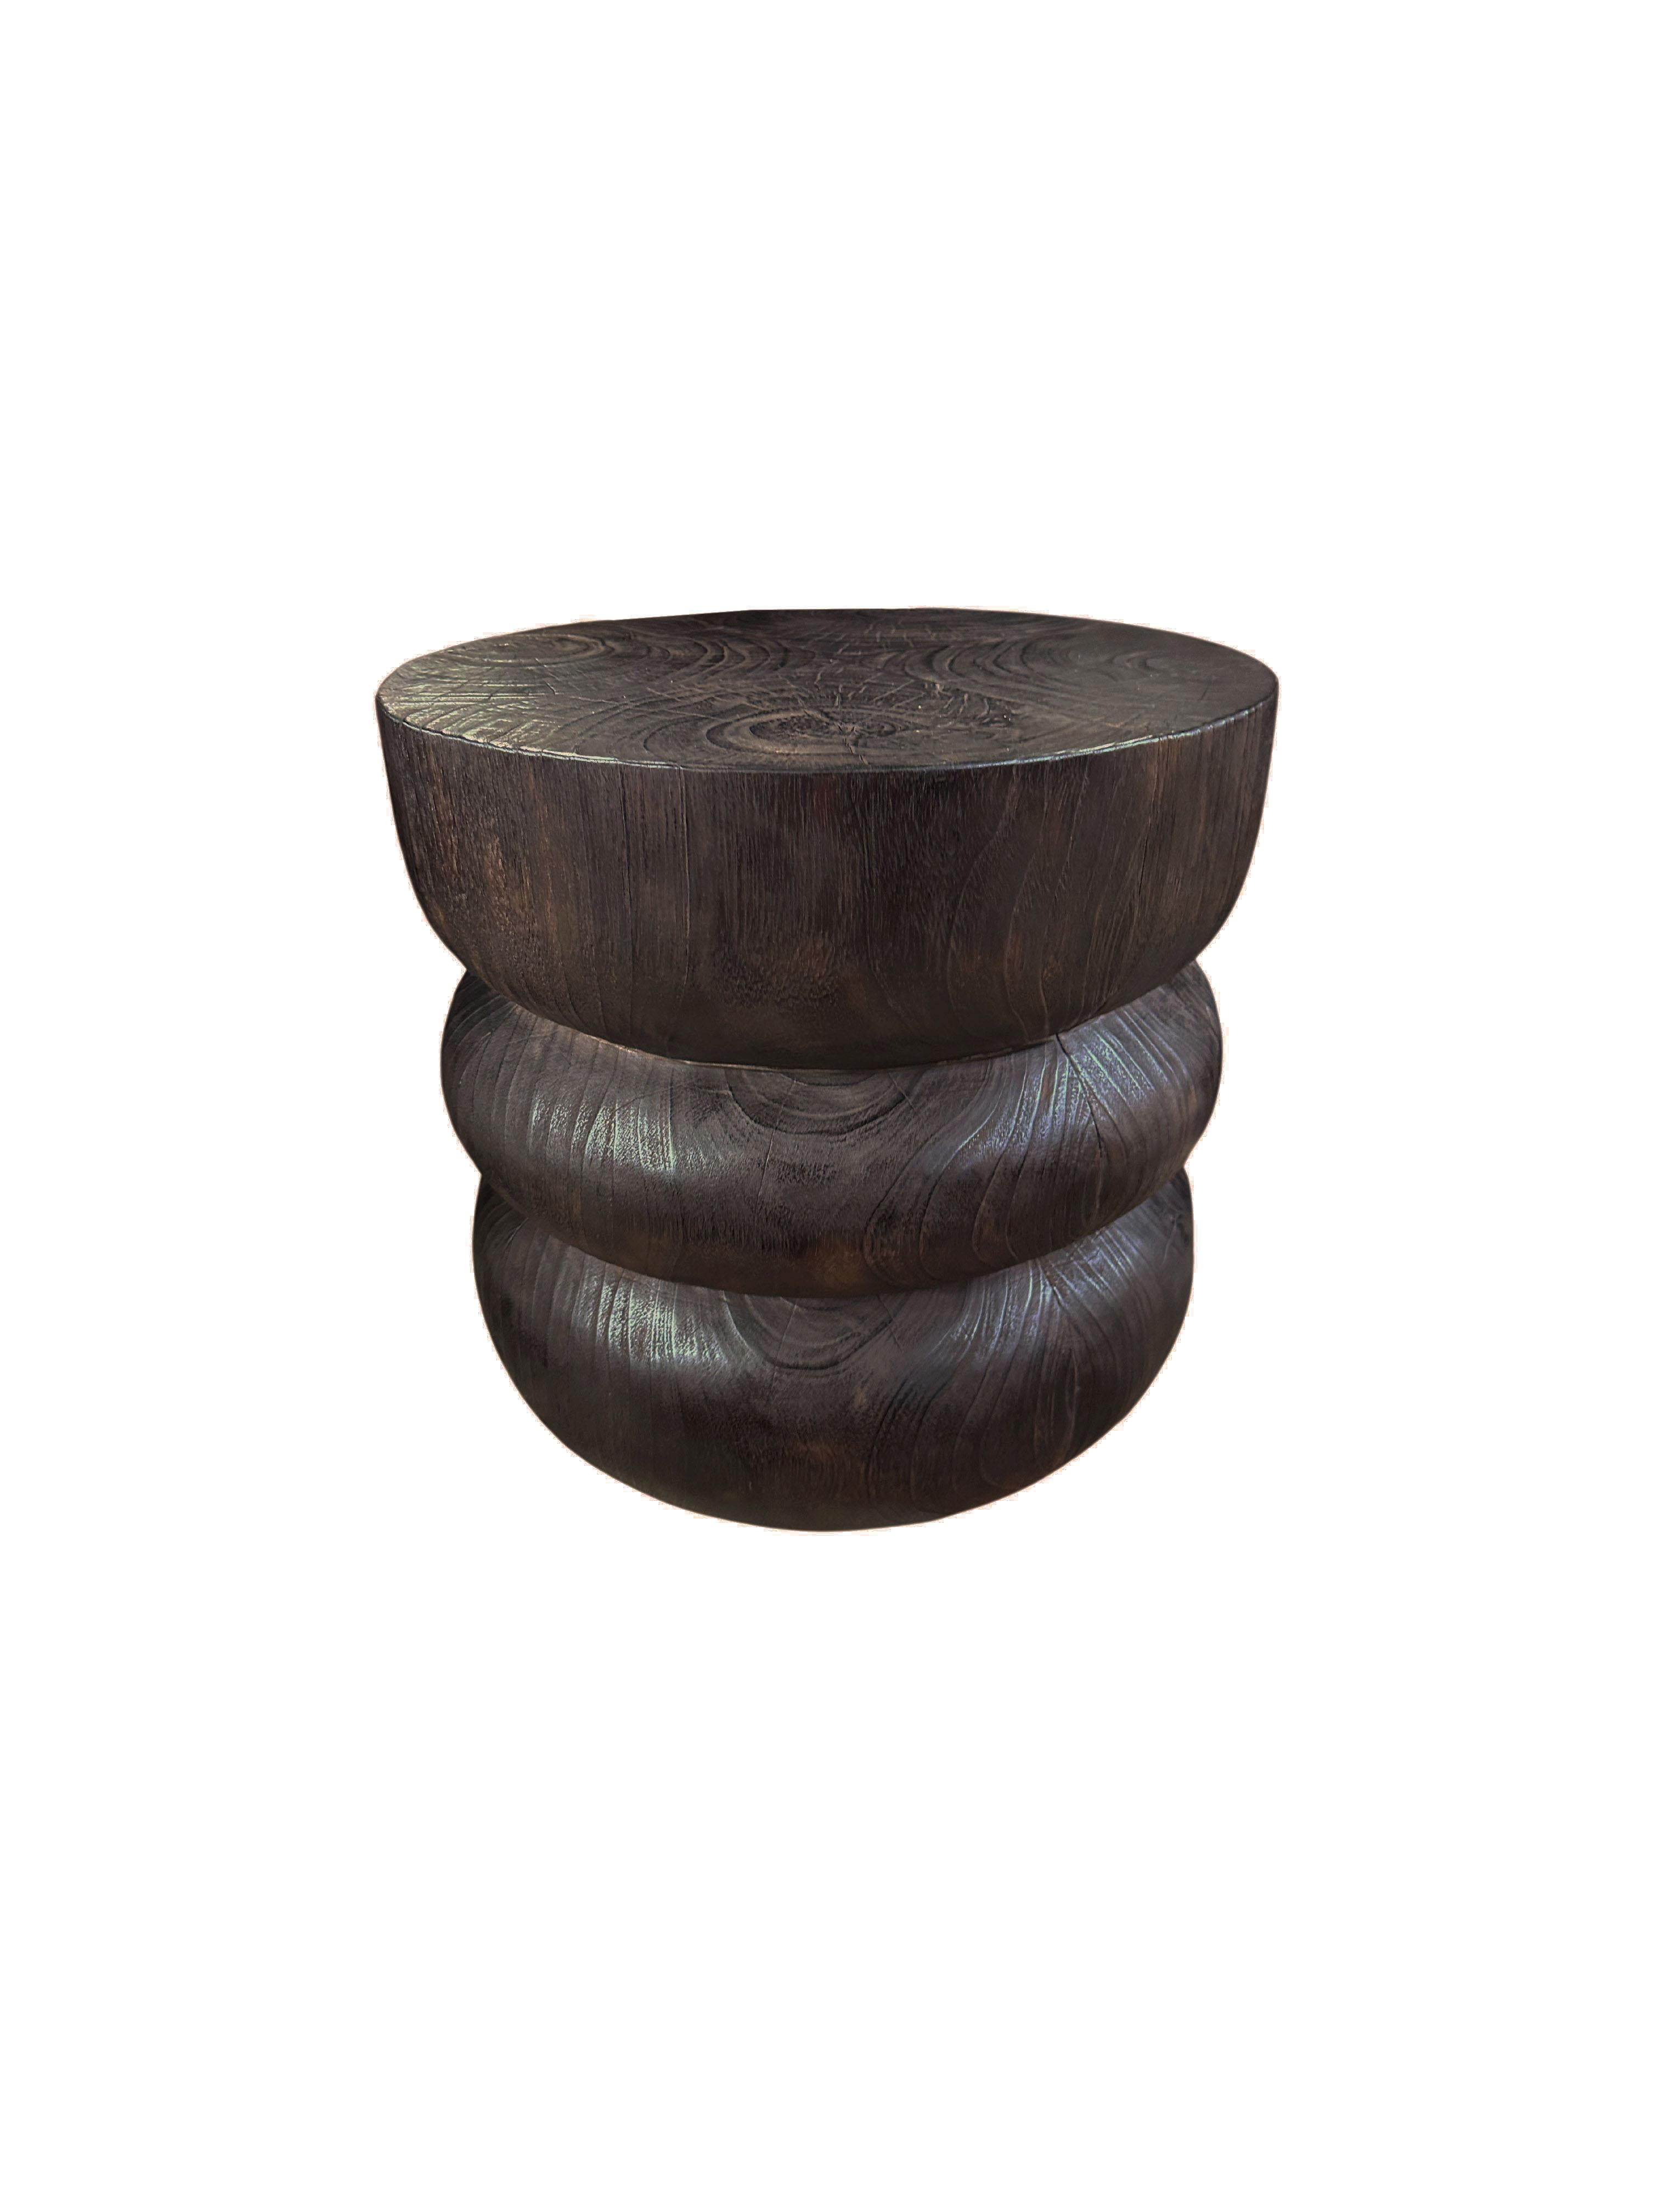 Hand-Crafted Round Teak Wood Side Table, Burnt Finish, Layered Design, Modern Organic For Sale